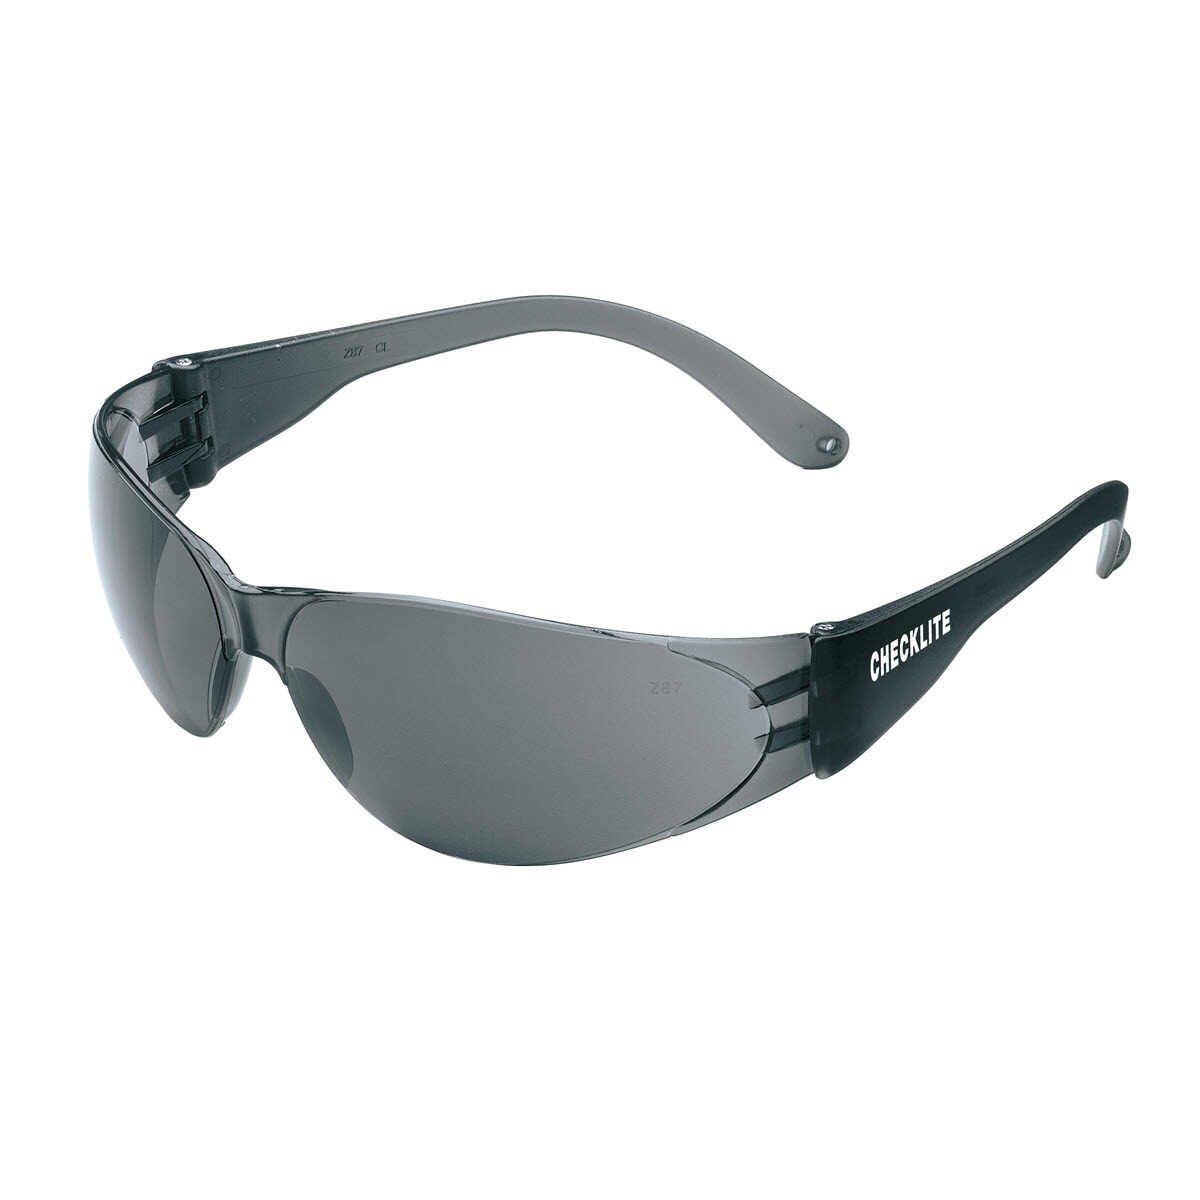 Checklite® CL1 Series Safety Glasses, Smoke Temples, Gray Lens